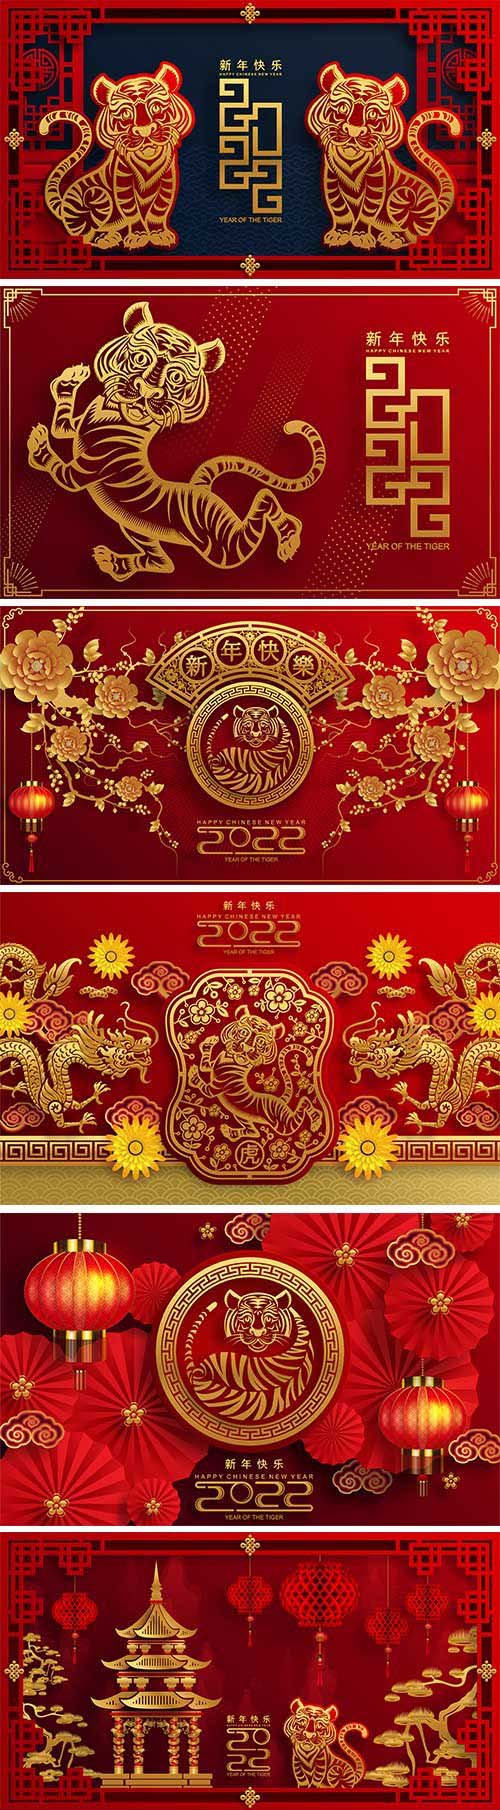 Chinese New Year, illustration with tiger, symbol of 2022, vector texts